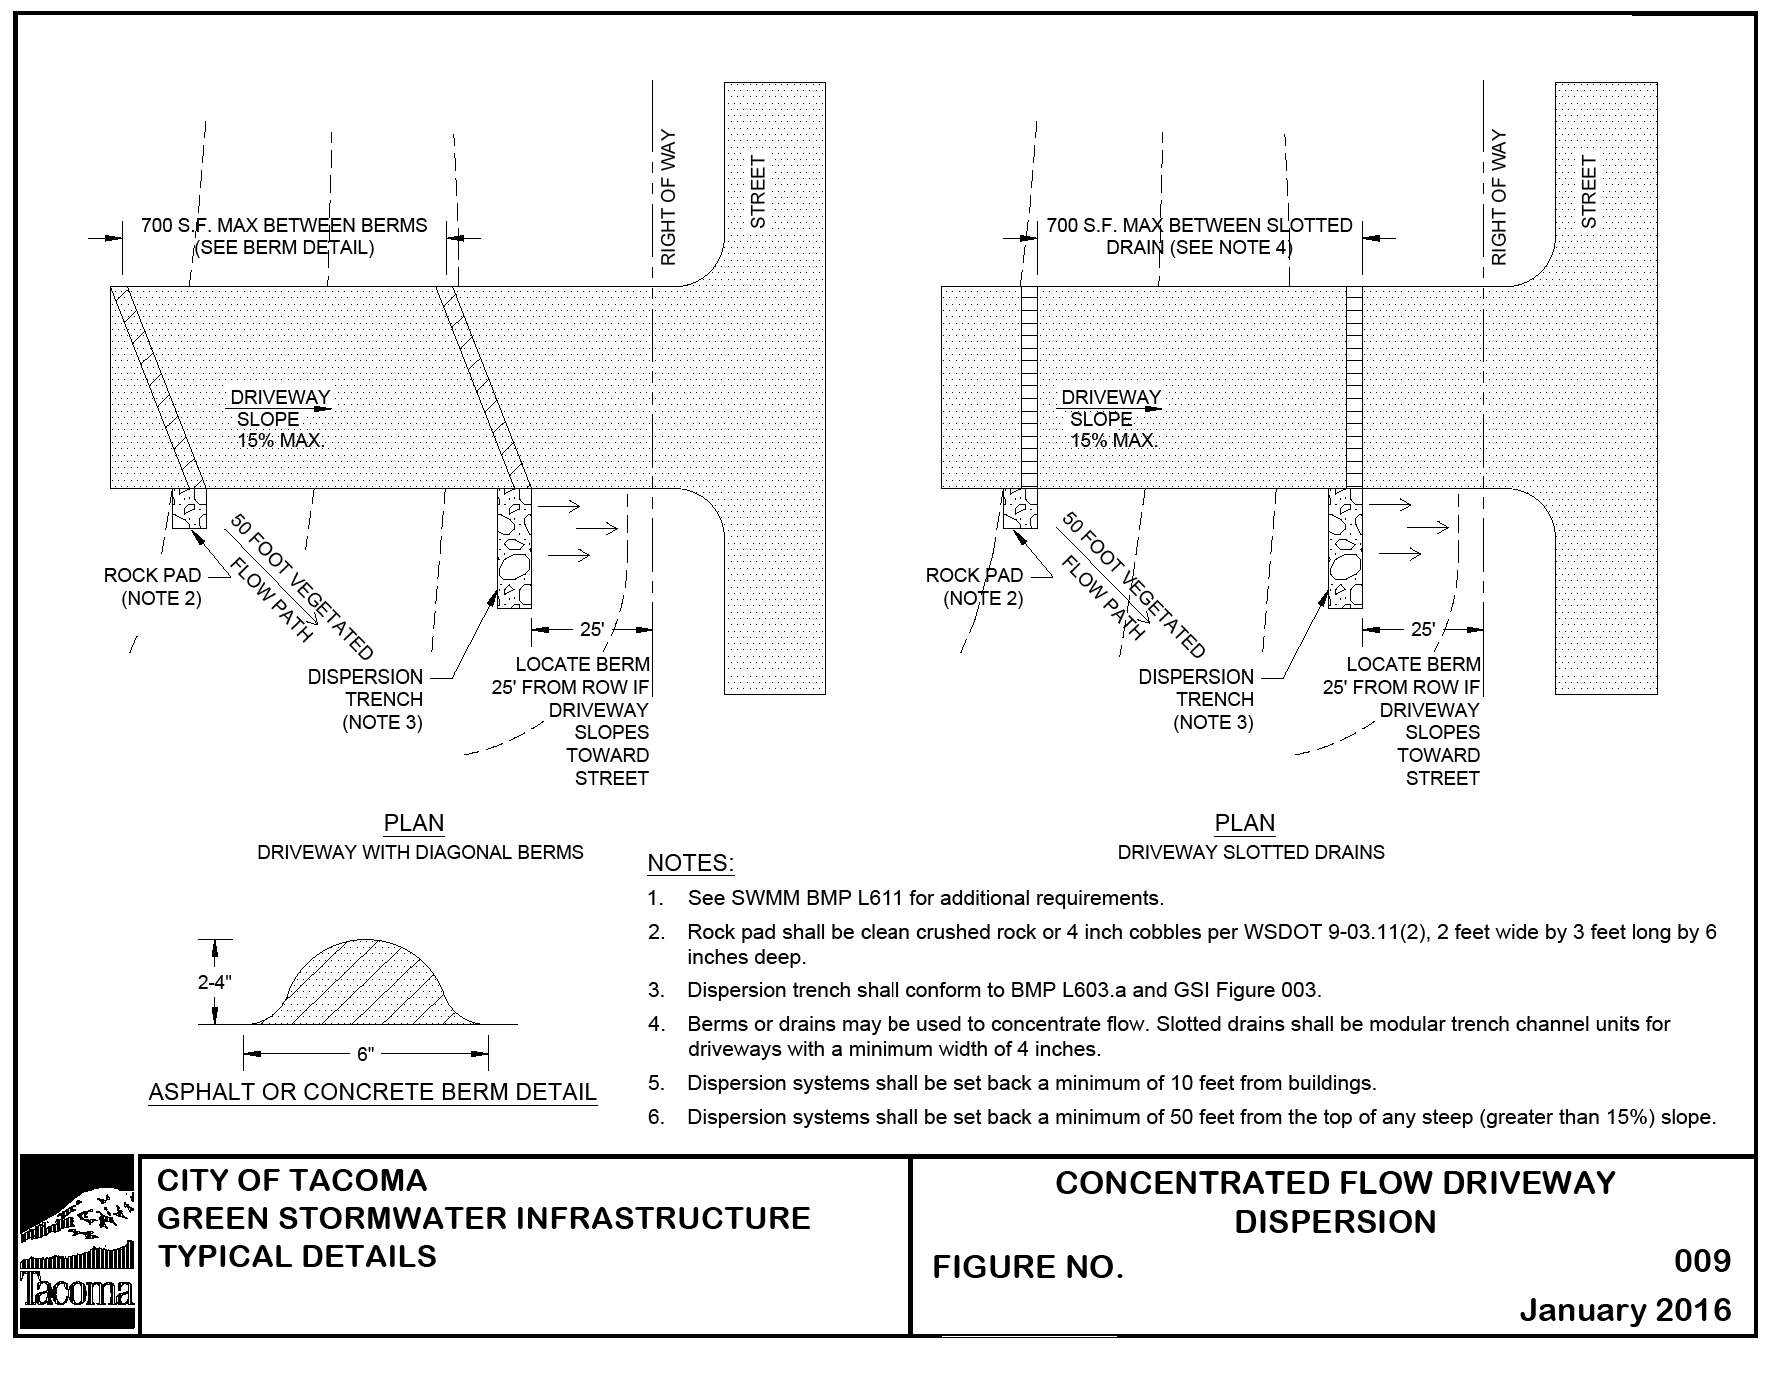 Figure 4-11 Concentrated Flow Driveway Dispersion